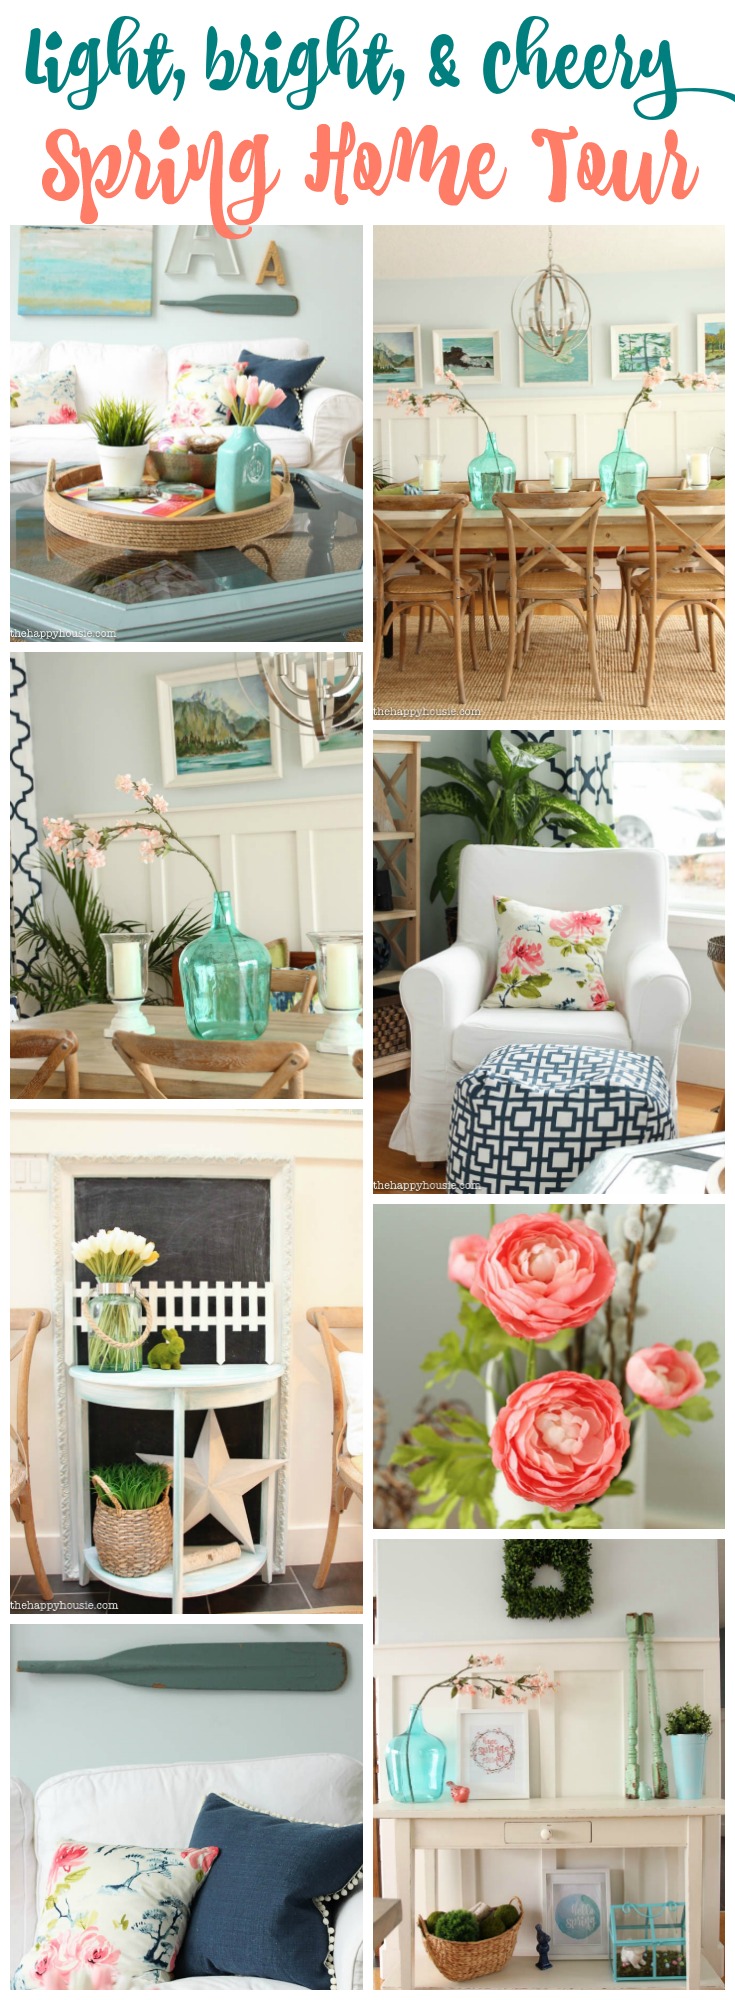 Light, bright and cheery Spring Home Tour at the happy housie.